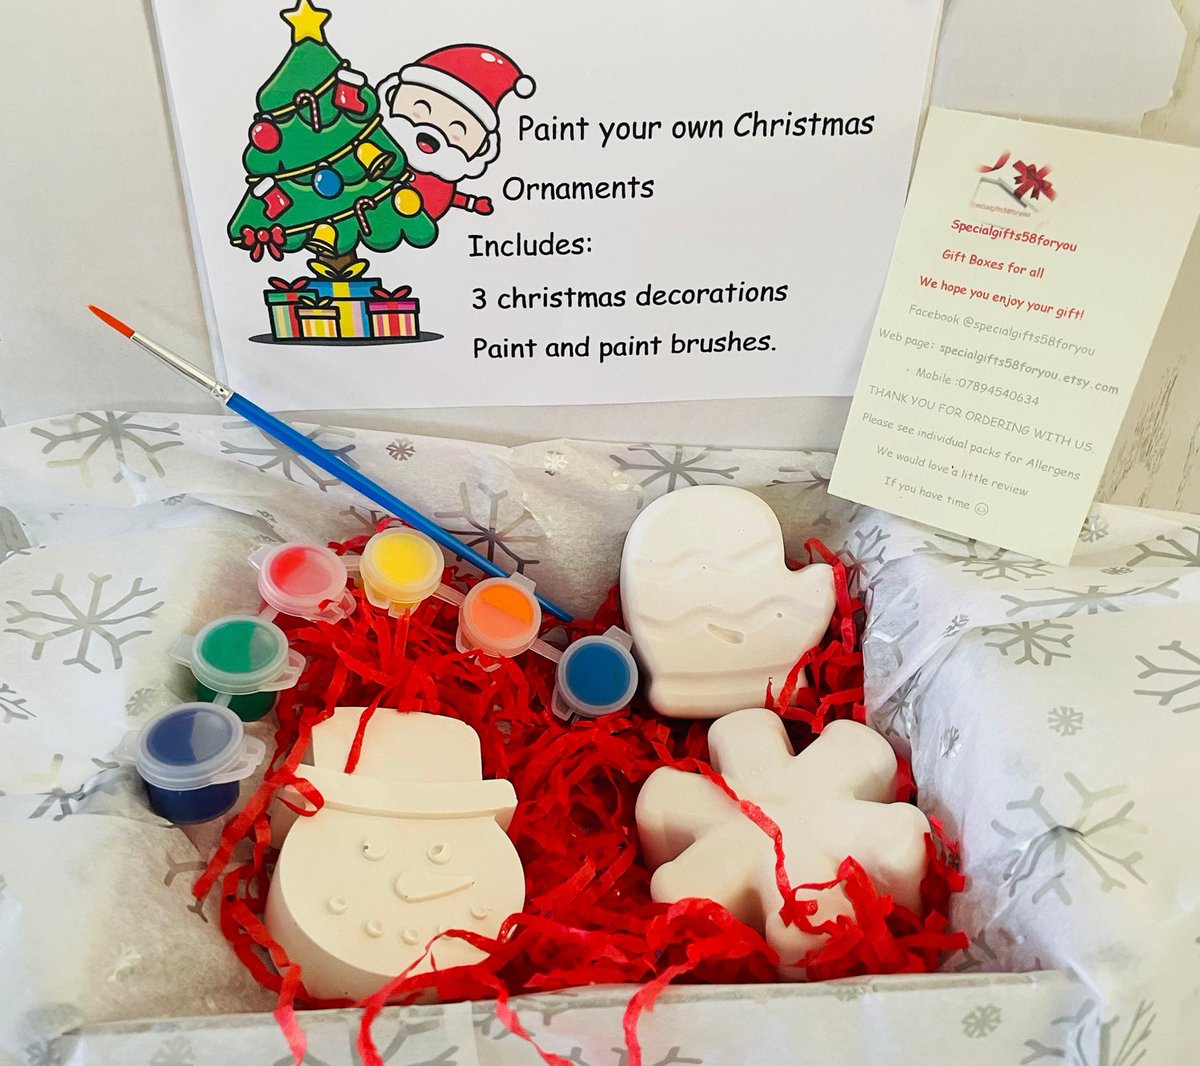 #etsy Paint your own Christmas ornaments,Christmas decorations, Christmas activity,Christmas stocking fillers #partyfavours #paintinggift #christmascraft #christmasevebox #kidscrafting #kidsactivitygift #christmasornaments #stockingfiller #paintyourowngift etsy.me/3P6PUf2